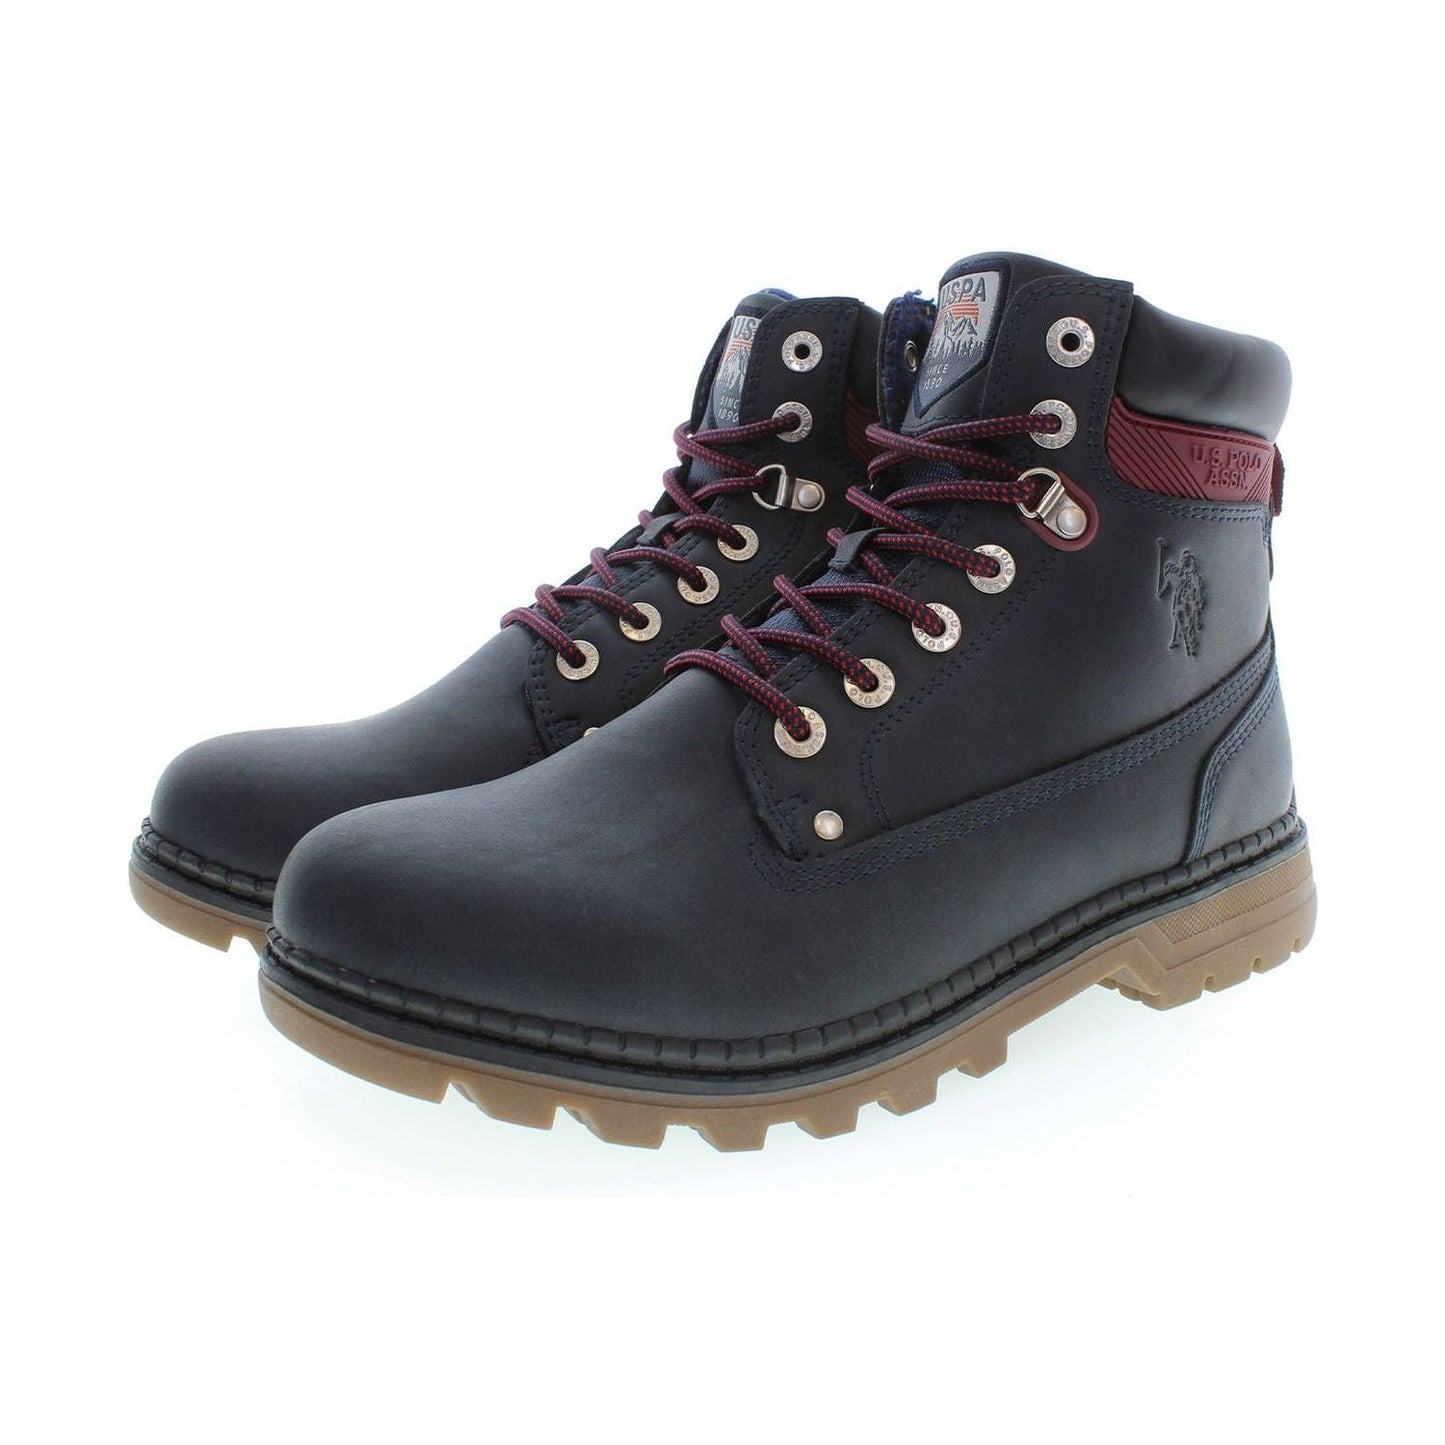 U.S. POLO ASSN. | Elegant Blue High Boots with Lace Detail| McRichard Designer Brands   